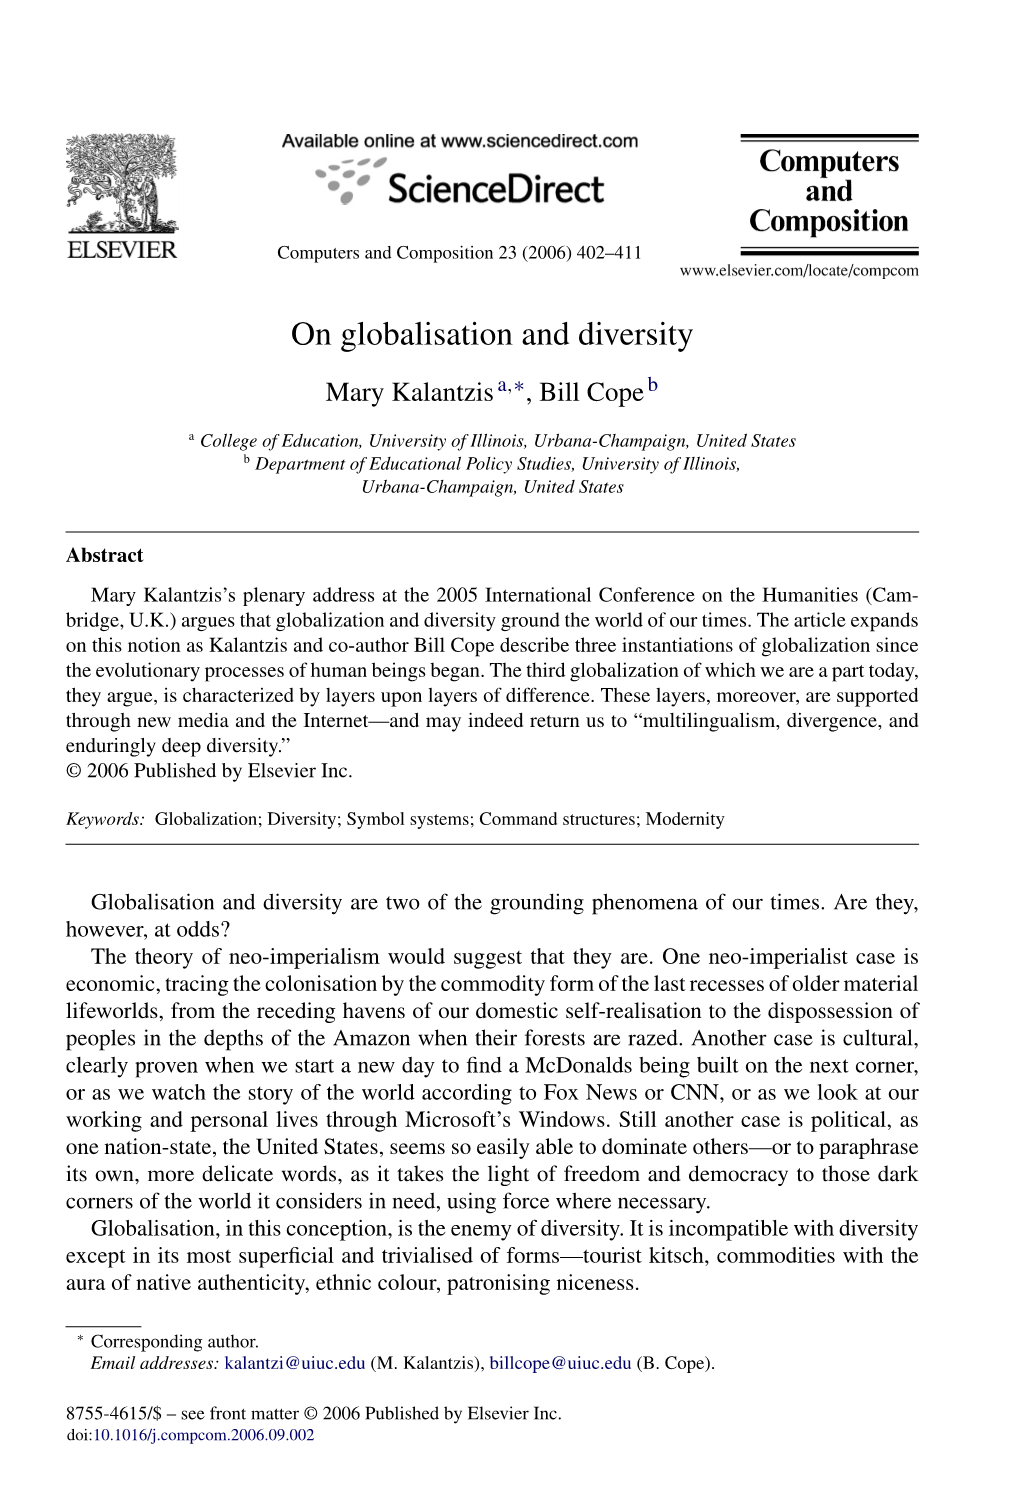 On Globalisation and Diversity